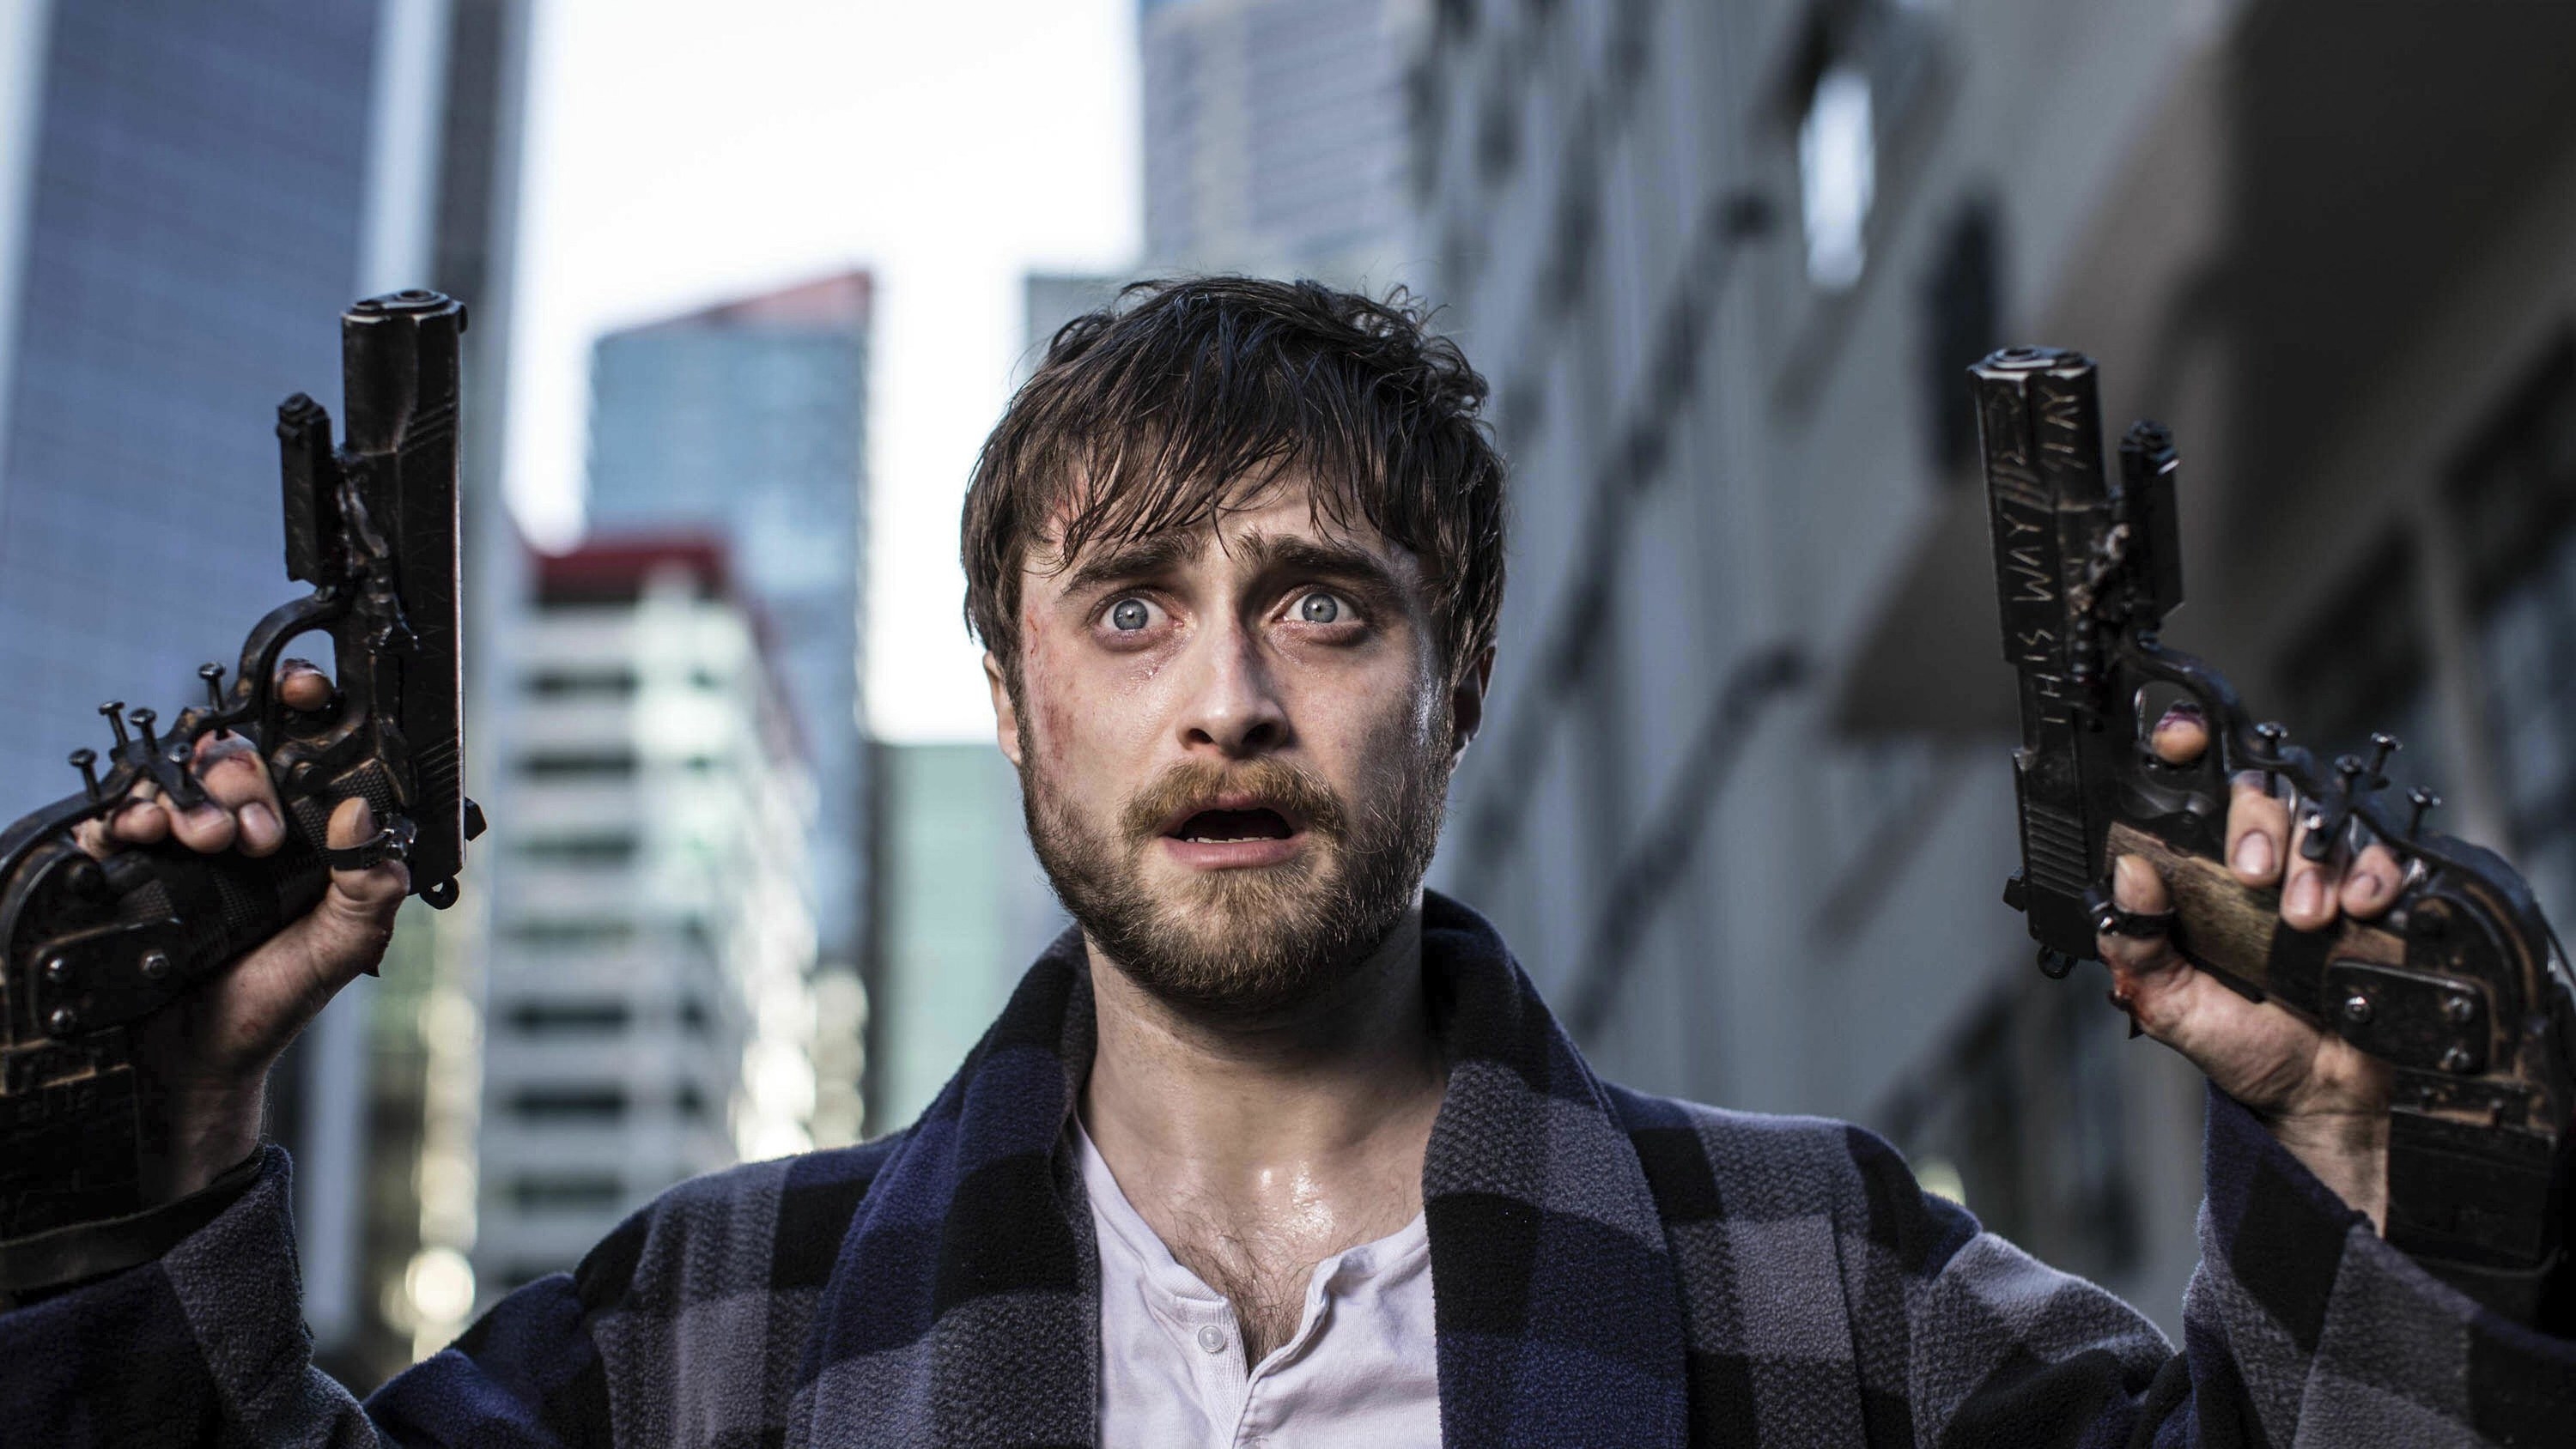 Daniel Radcliffe holds up two guns nailed into his fingers on the city streets